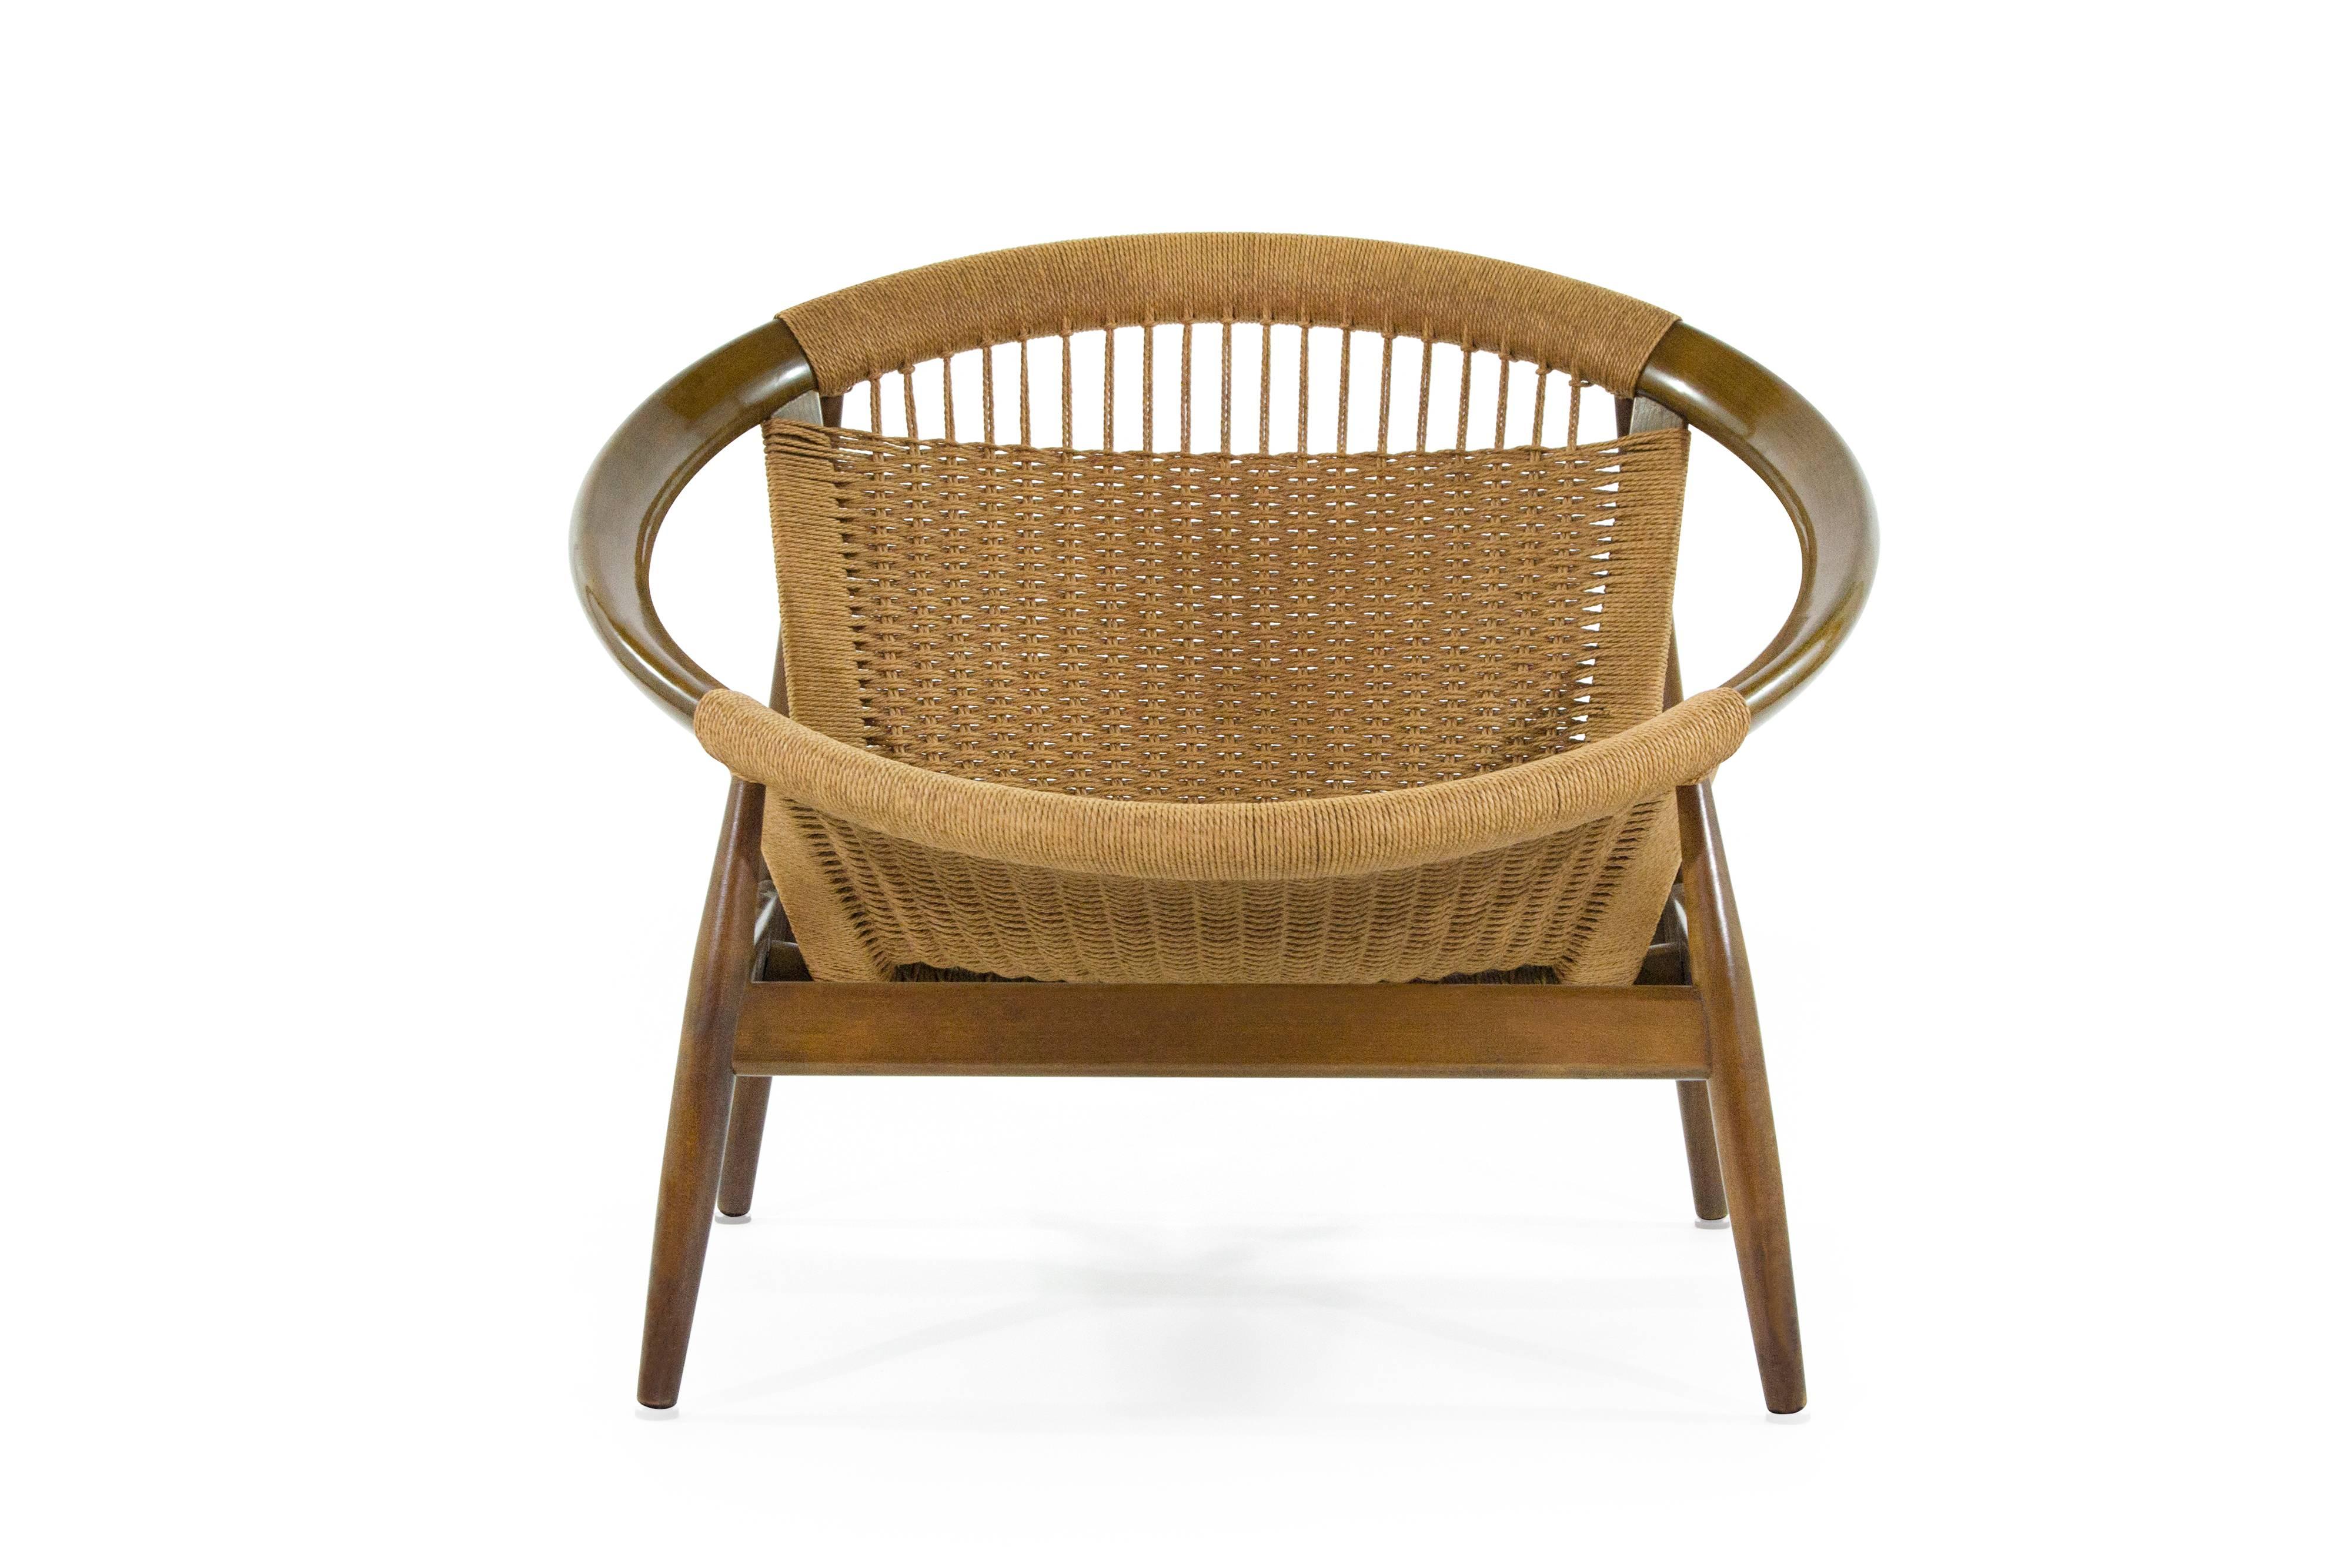 The Ringstol Chair No. 23 was produced in Denmark by N. Eilersen beginning in the mid-1950’s. This chair is stamped with the original number “23” and “Made in Denmark”. Fully restored.